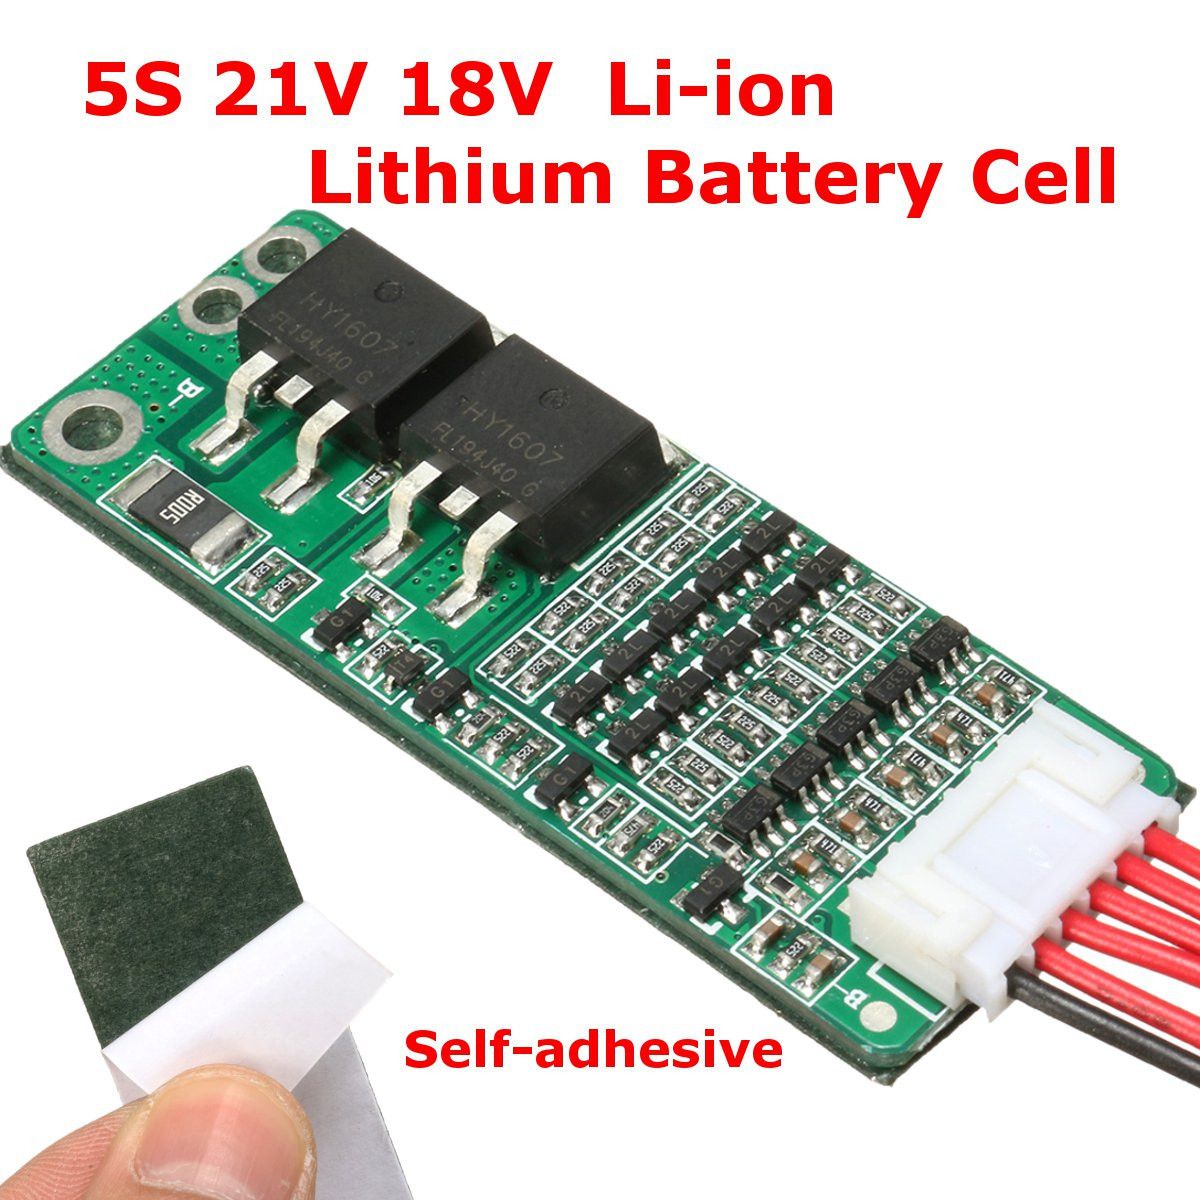 10pcs-5S-Lithium-Battery-21V-18V-Protection-Board-Li-ion-Lithium-Battery-Cell-1121560